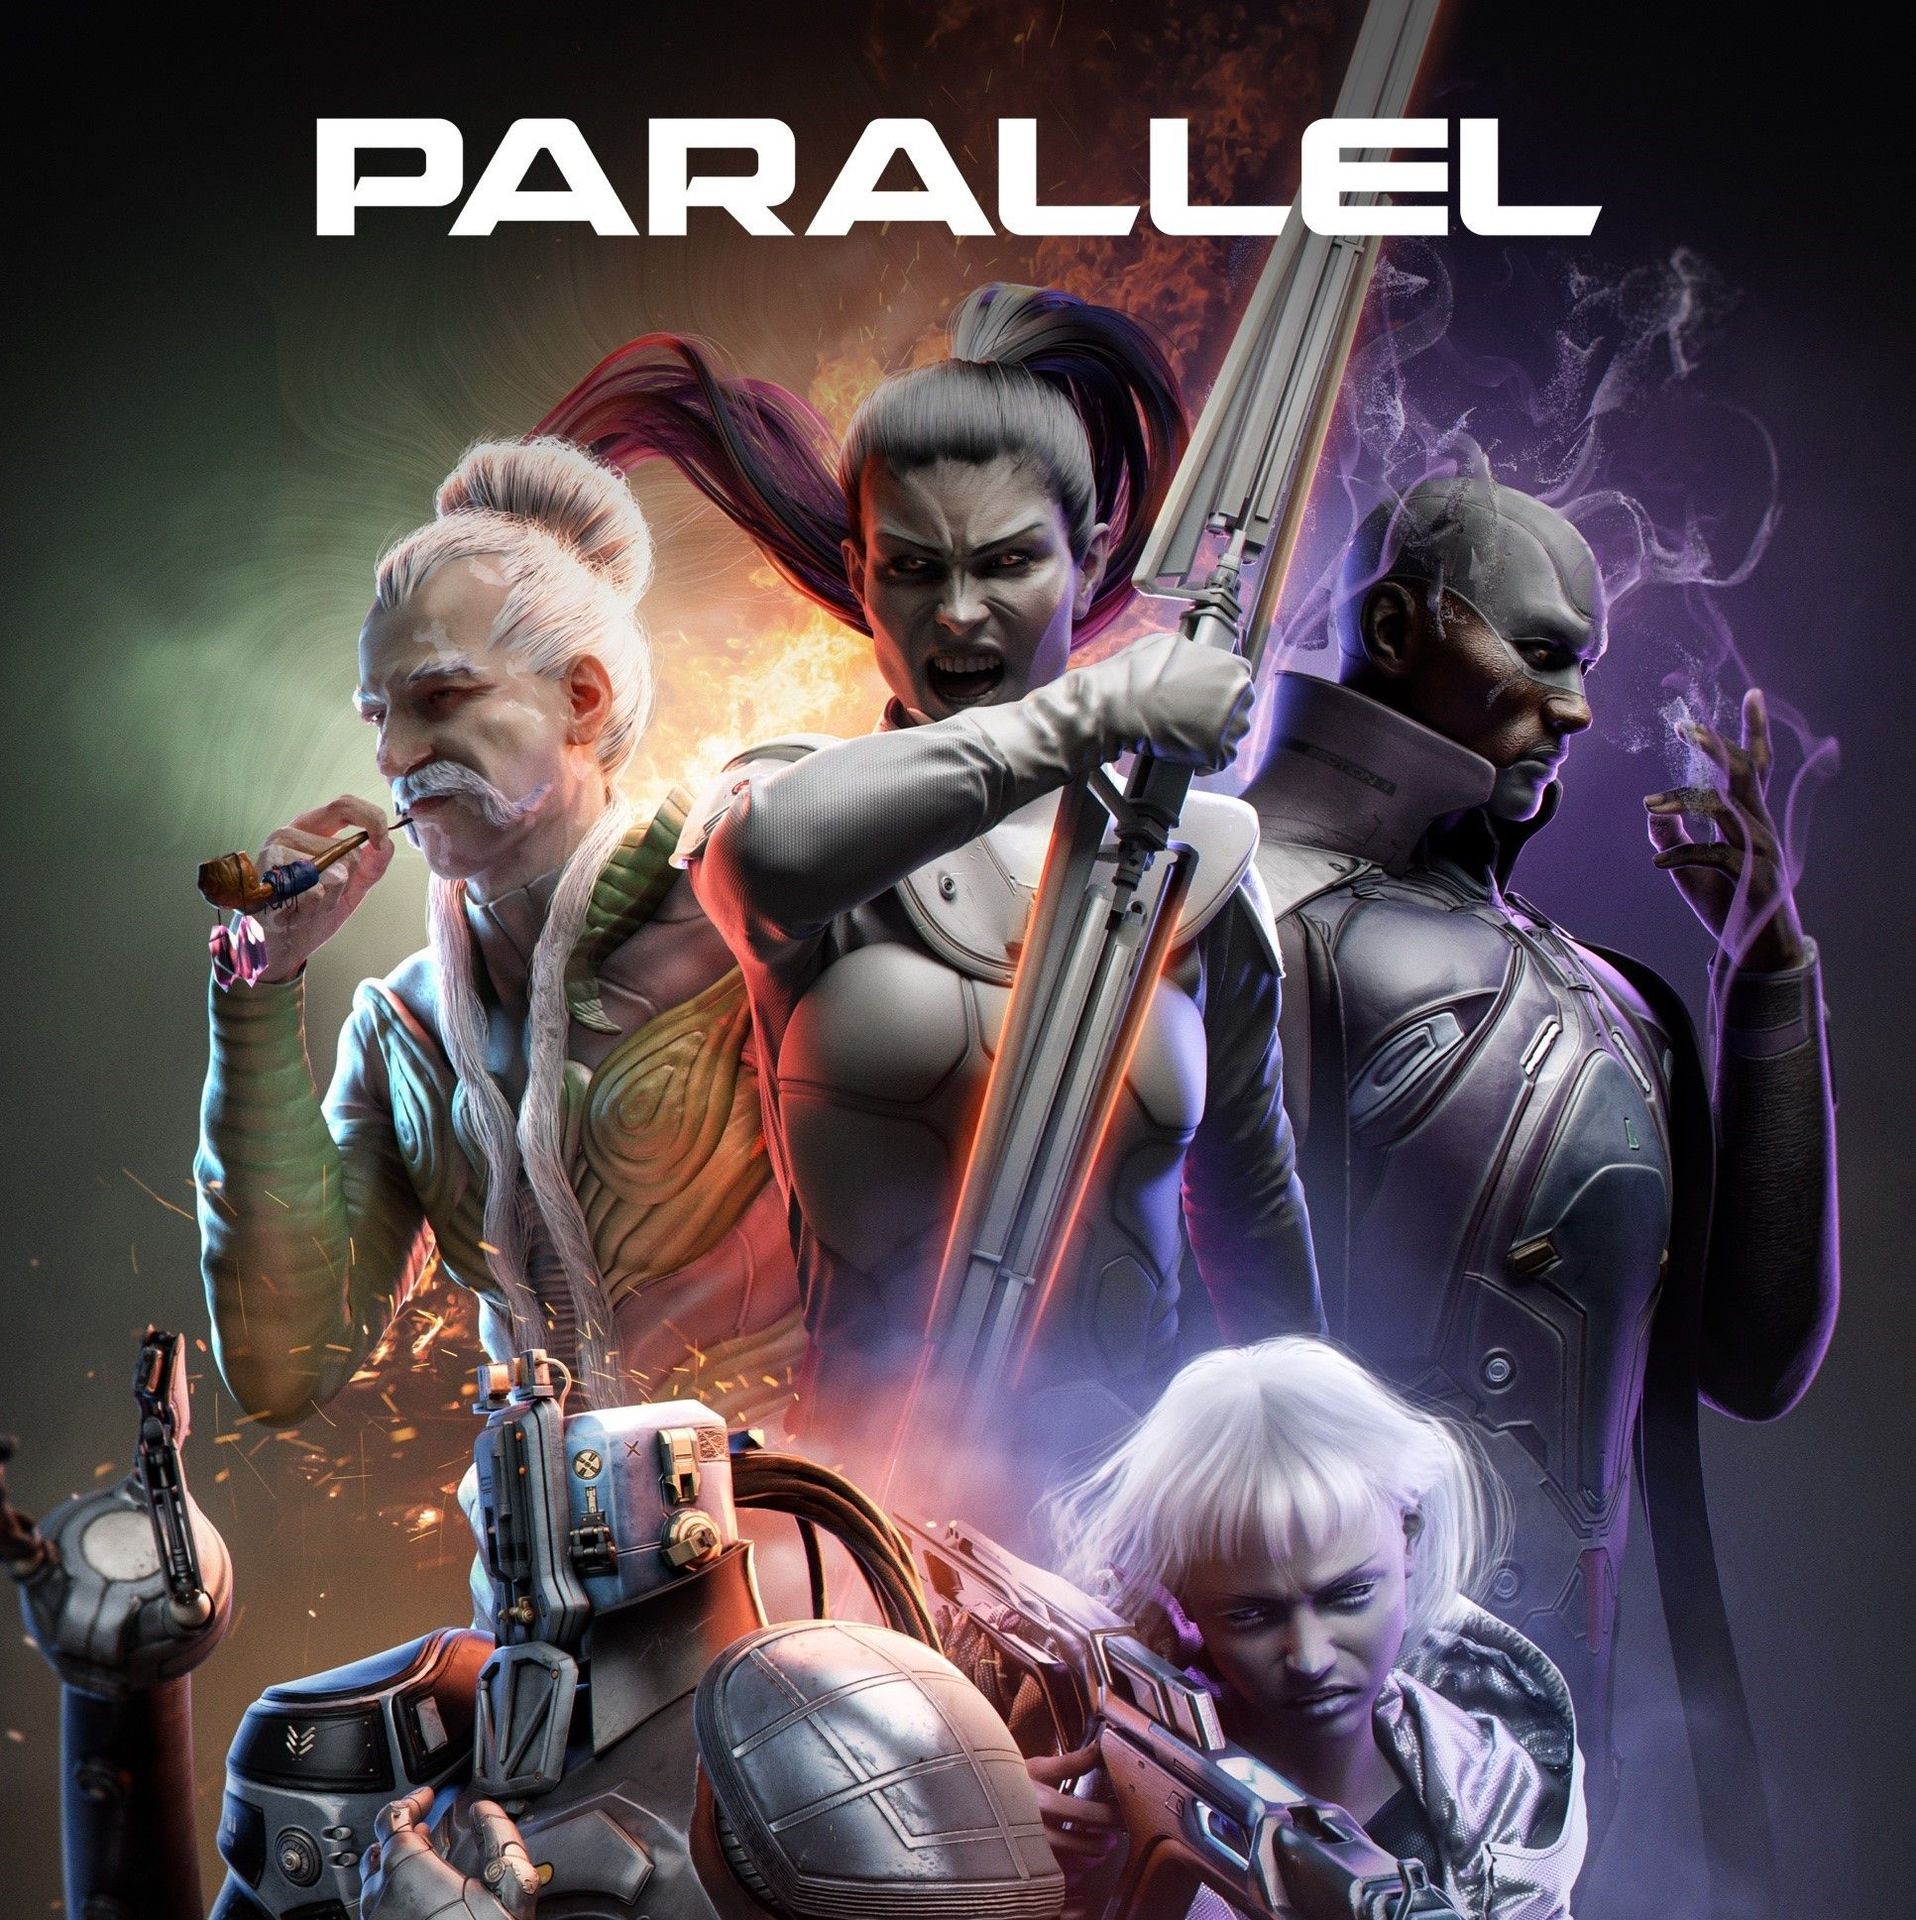 Parallel on X: 𝗣𝗹𝗮𝗻𝗲𝘁𝗳𝗮𝗹𝗹 𝗘𝗮𝗿𝗹𝘆 𝗔𝗰𝗰𝗲𝘀𝘀